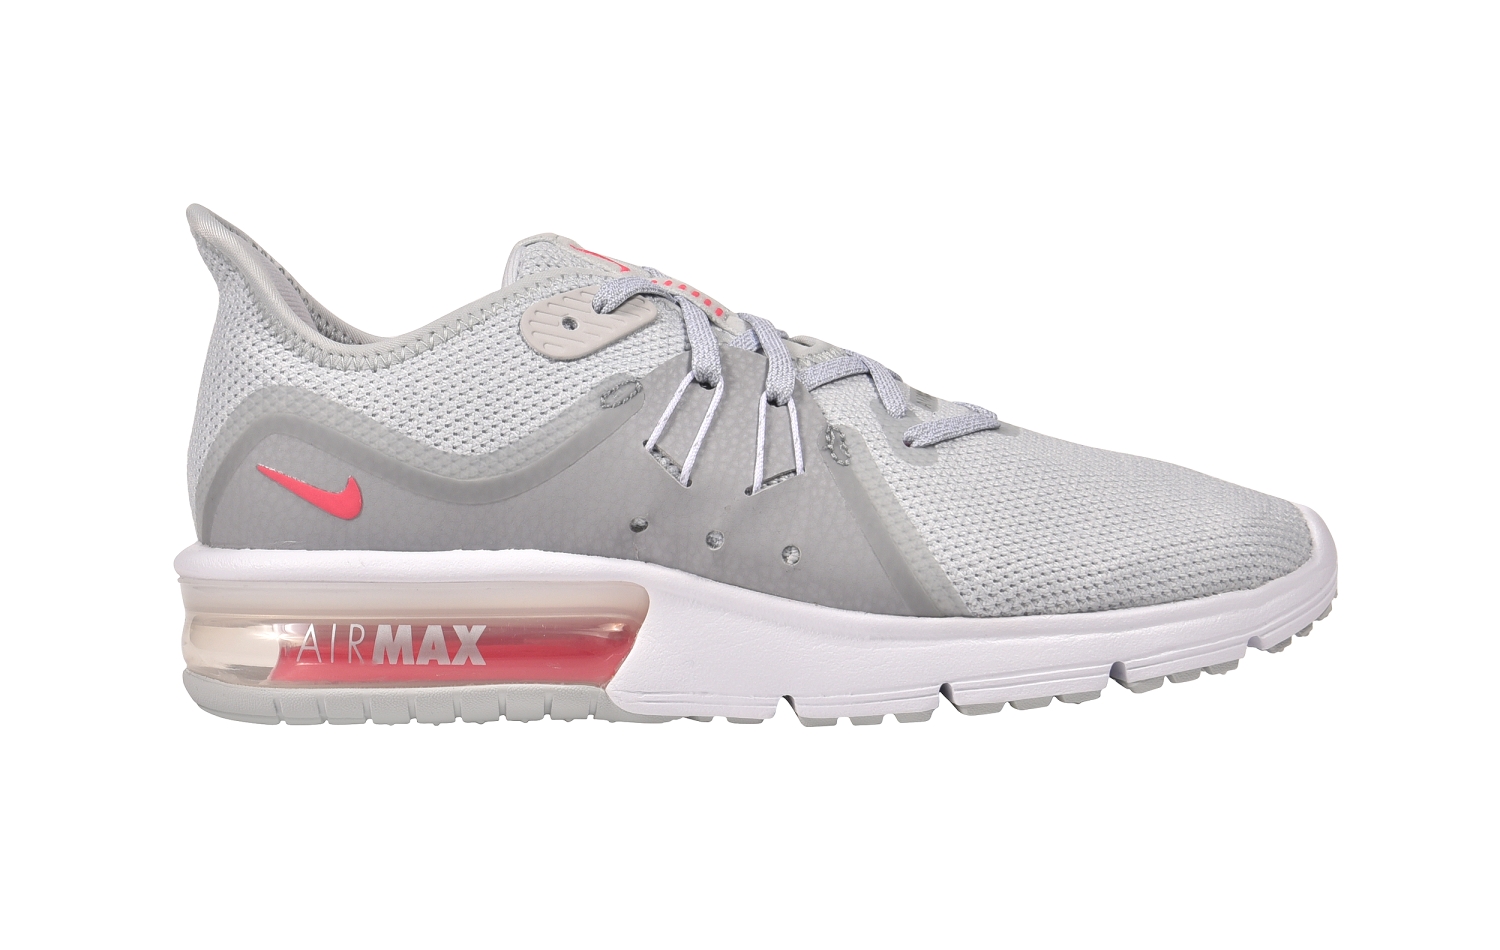 Nike Wmns Air Max Sequent 3 (908993-012)